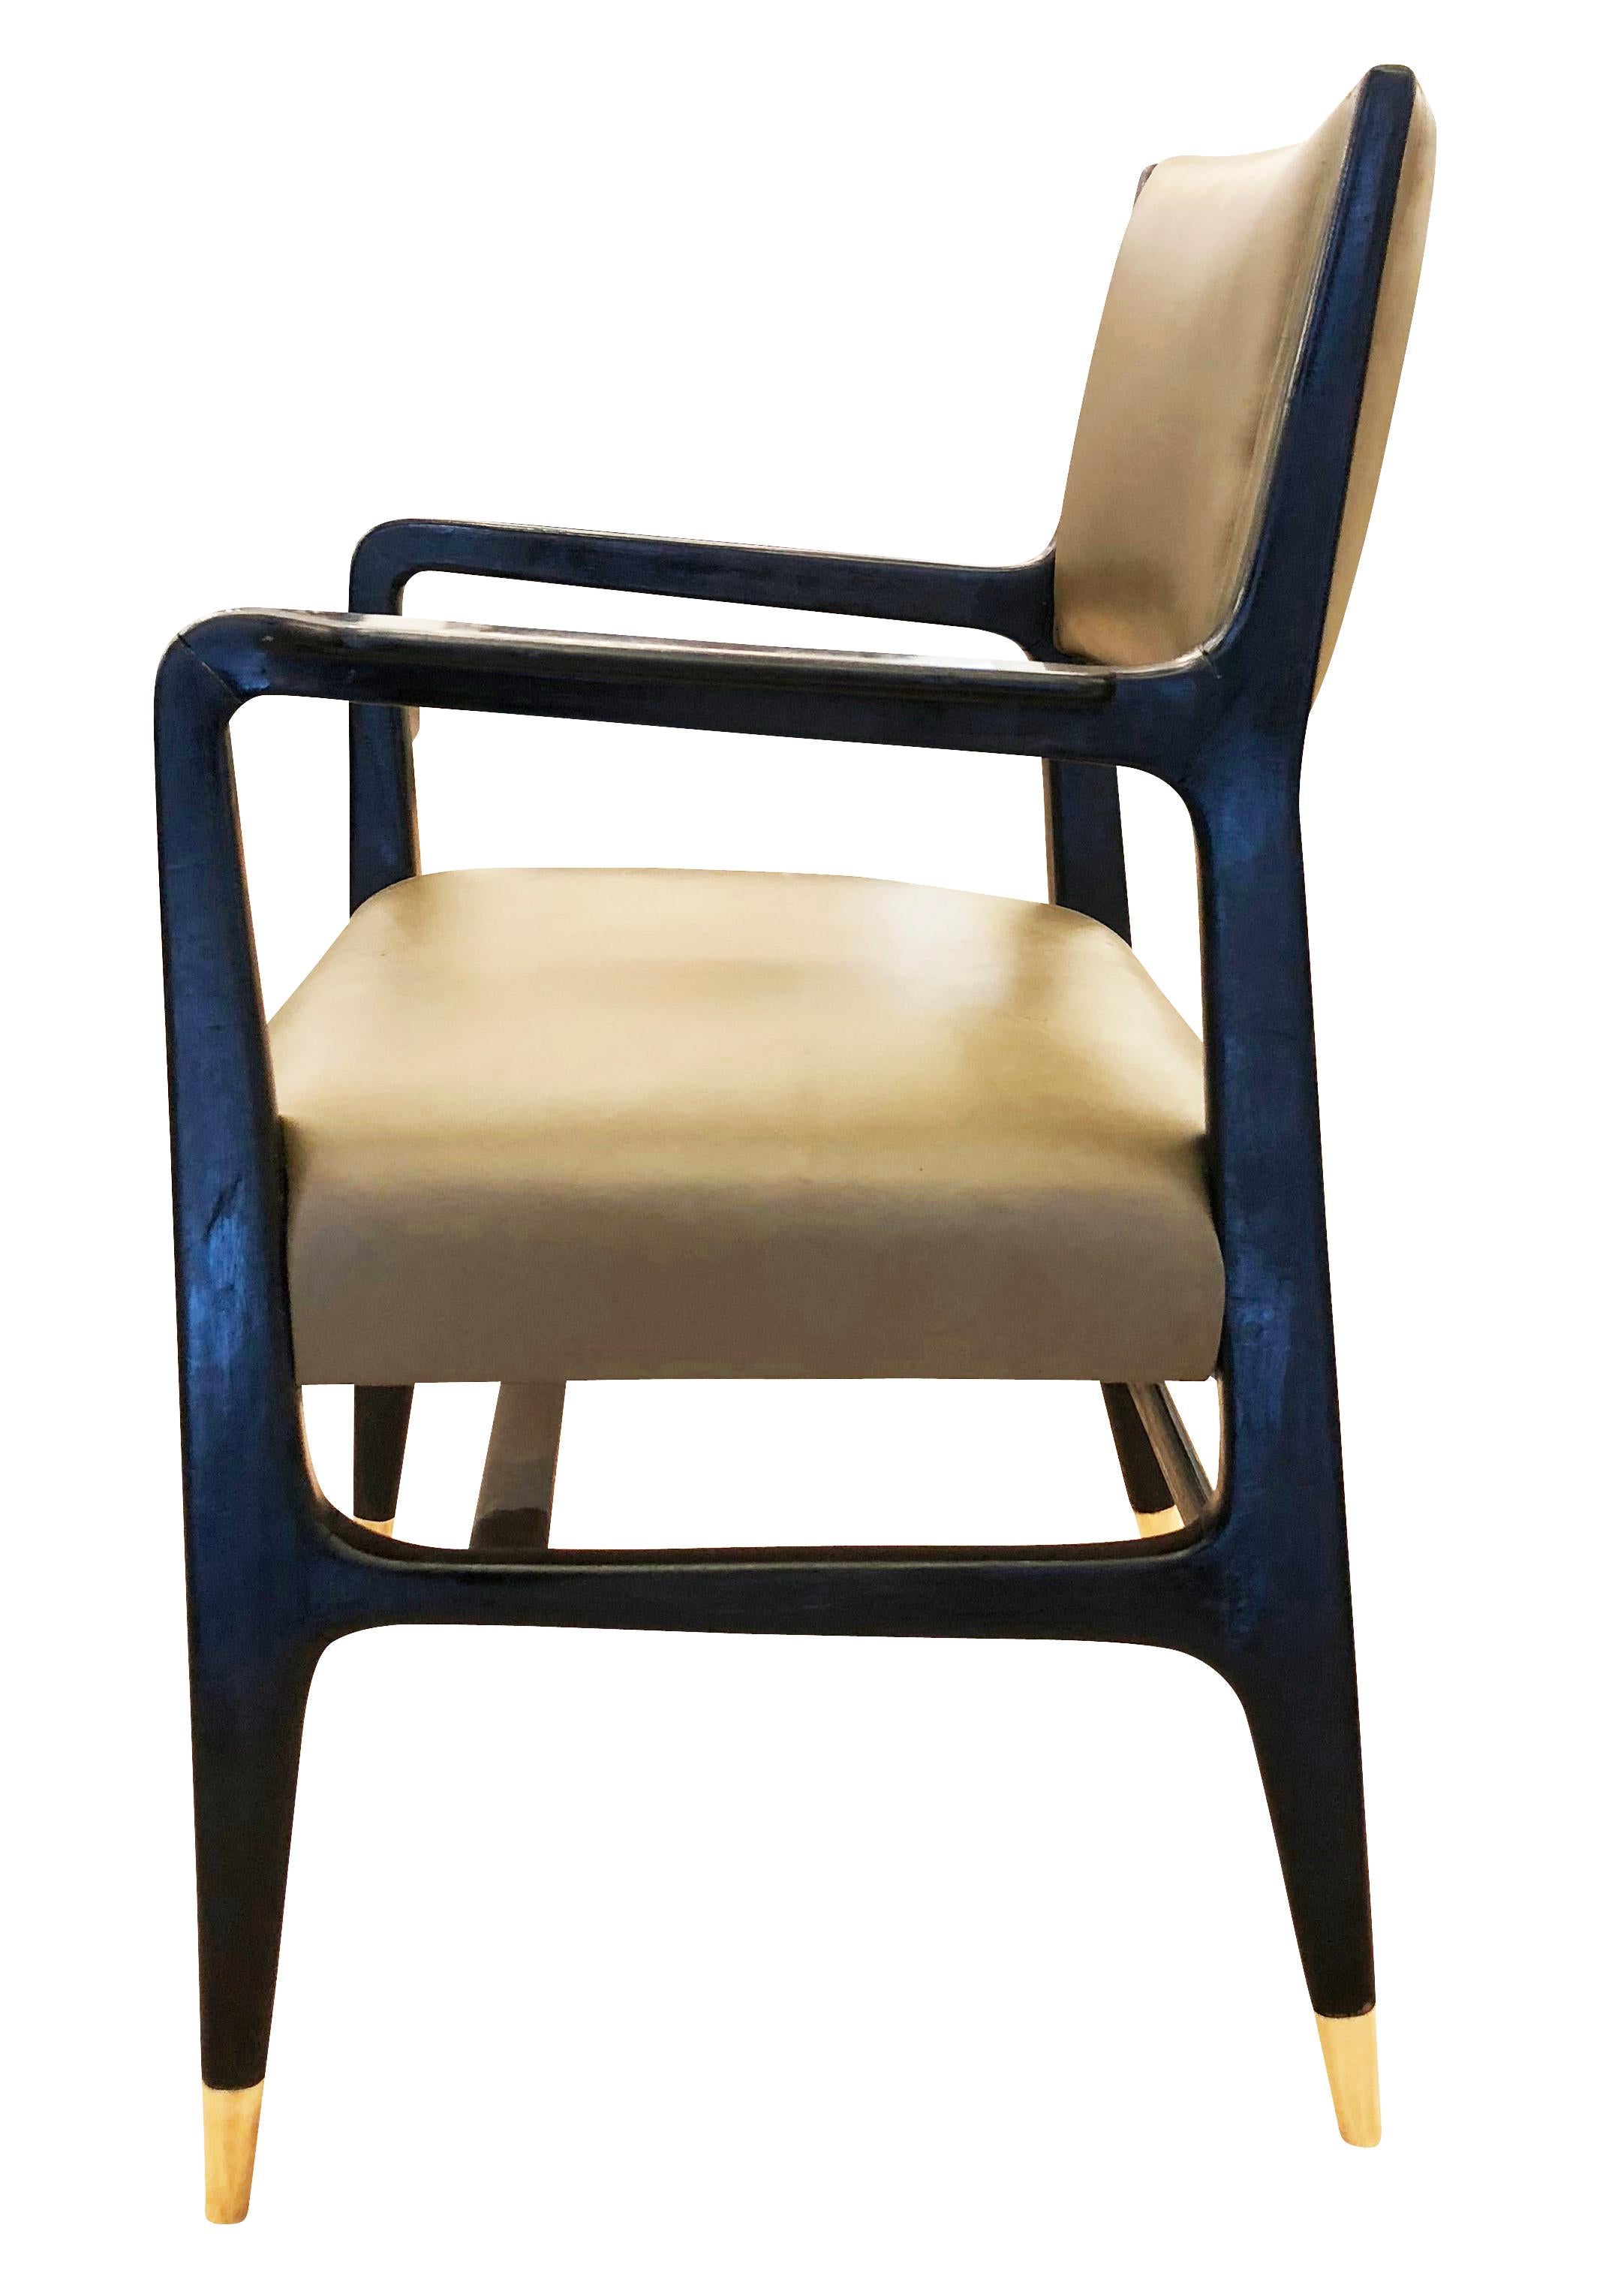 Mid-20th Century Gio Ponti Armchair for Cassina, Italy, 1950s For Sale